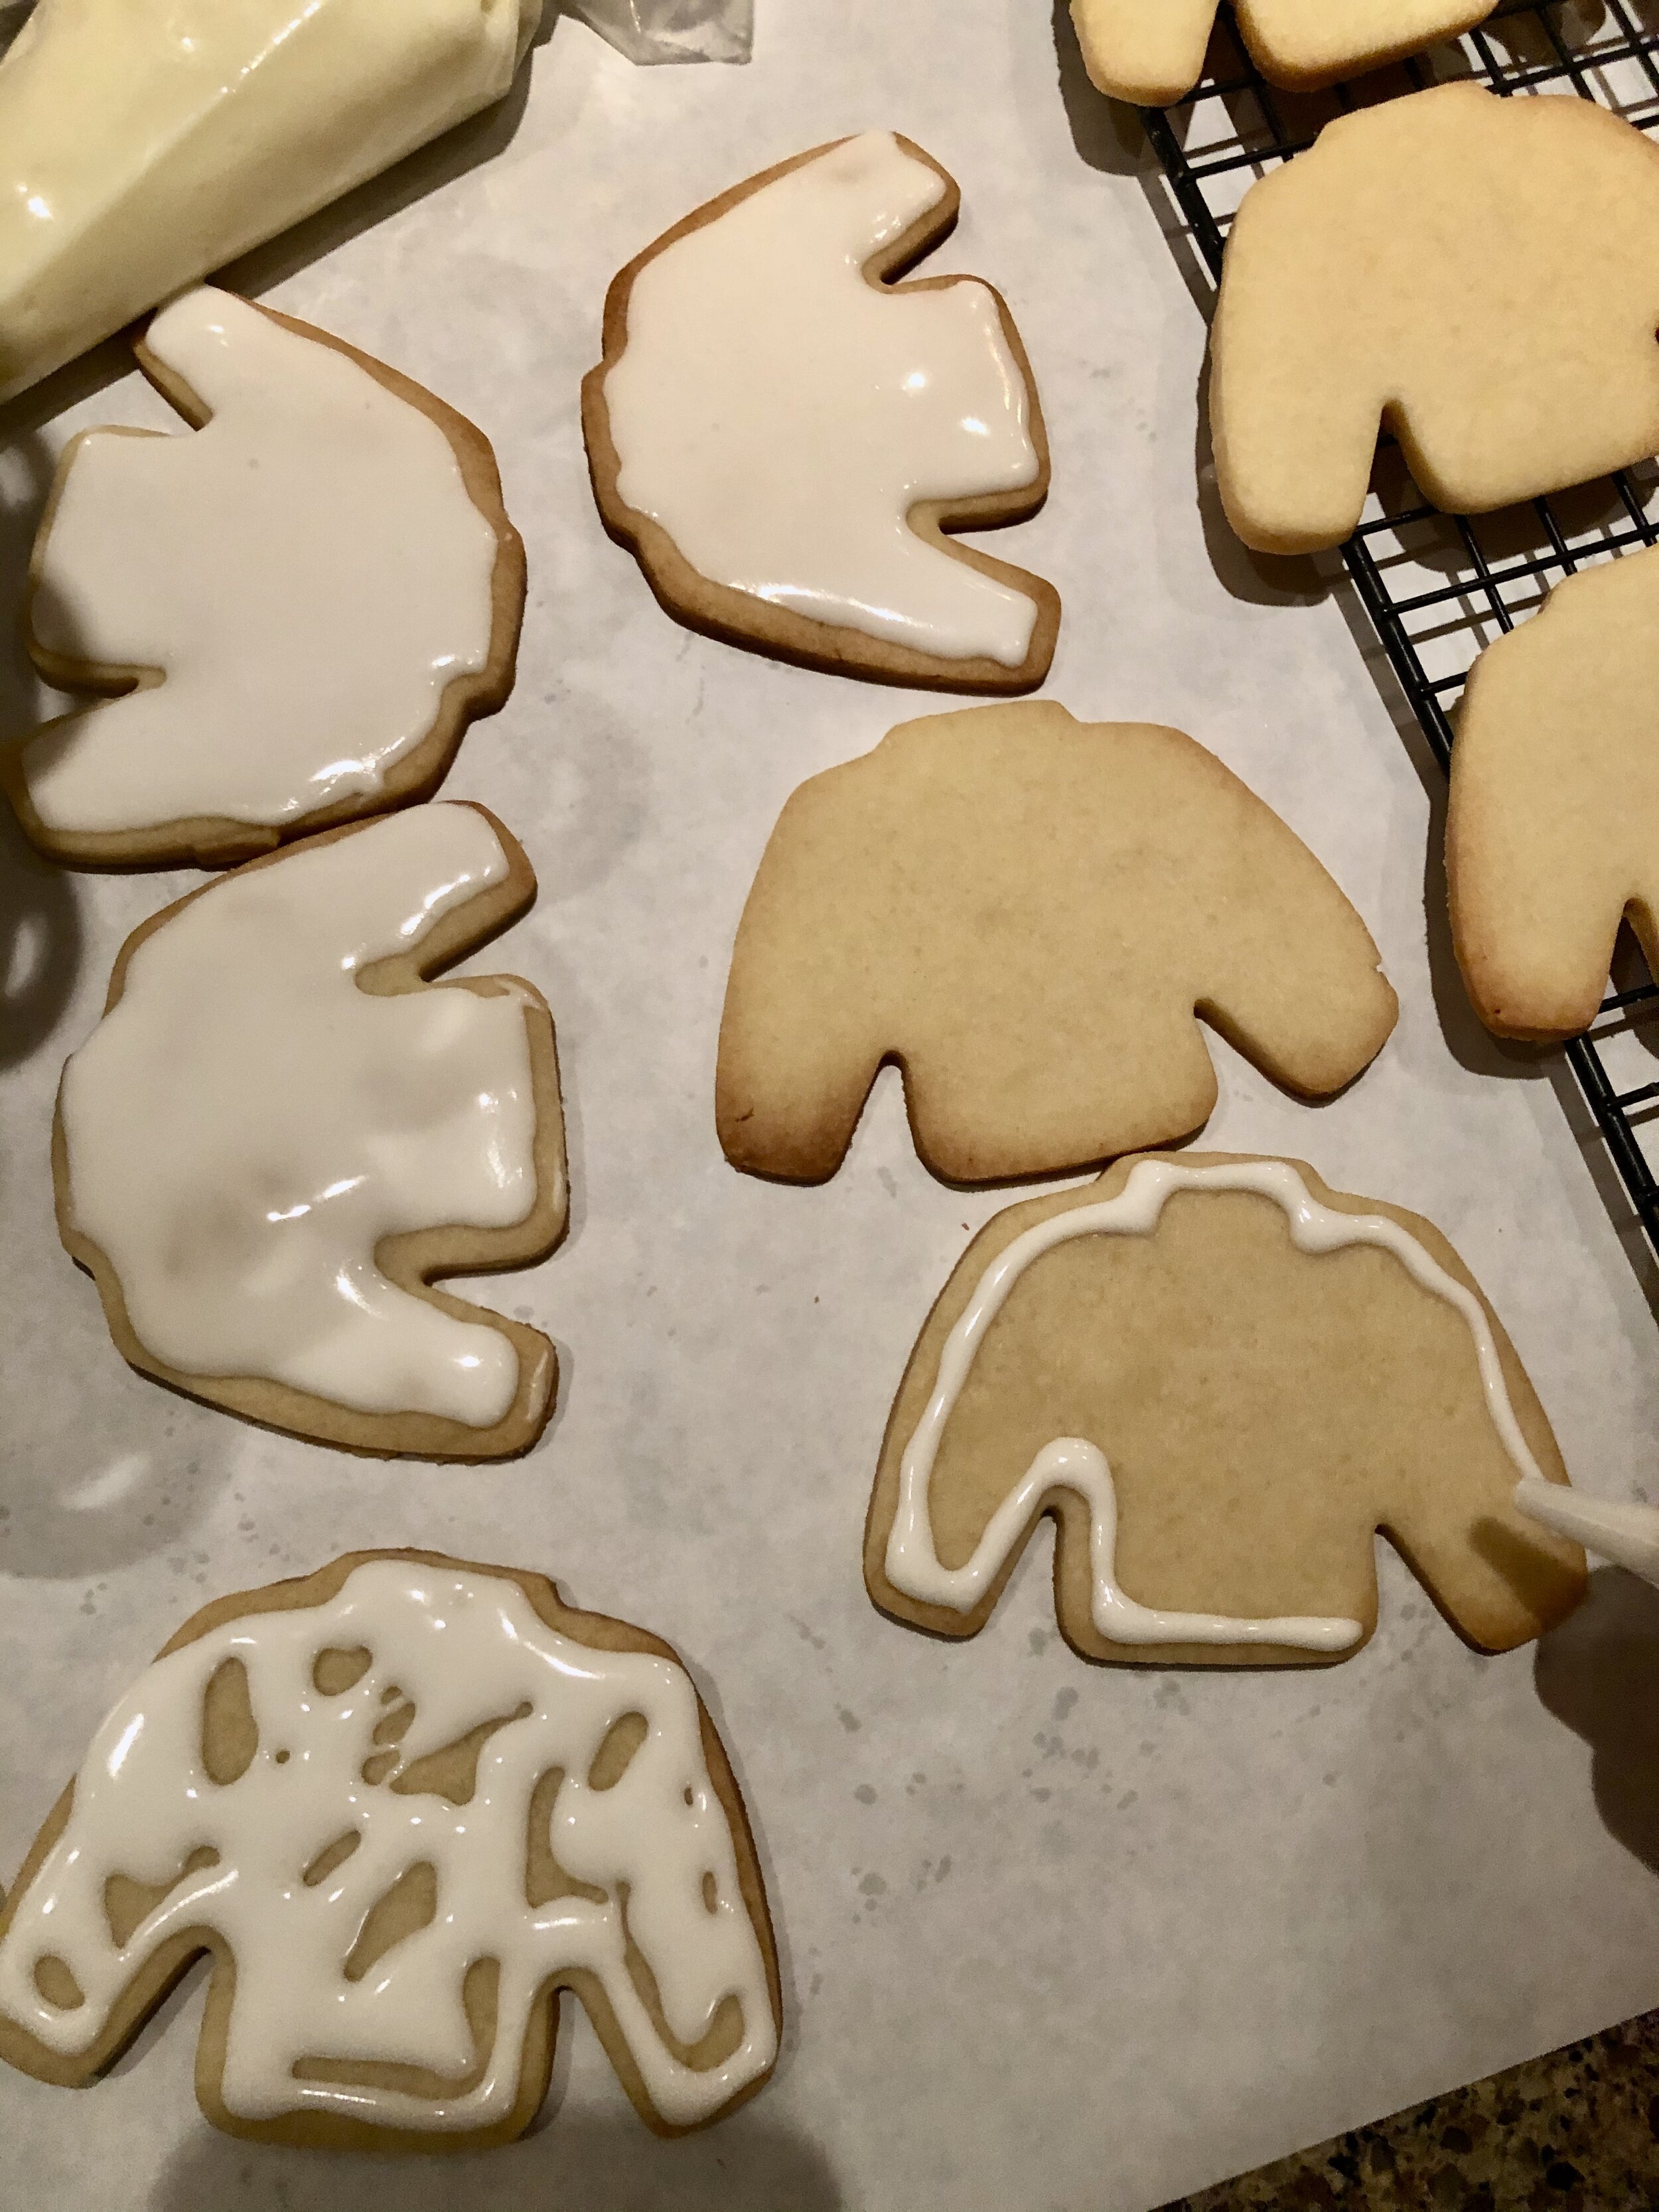 Flooding the cookies with Royal Icing